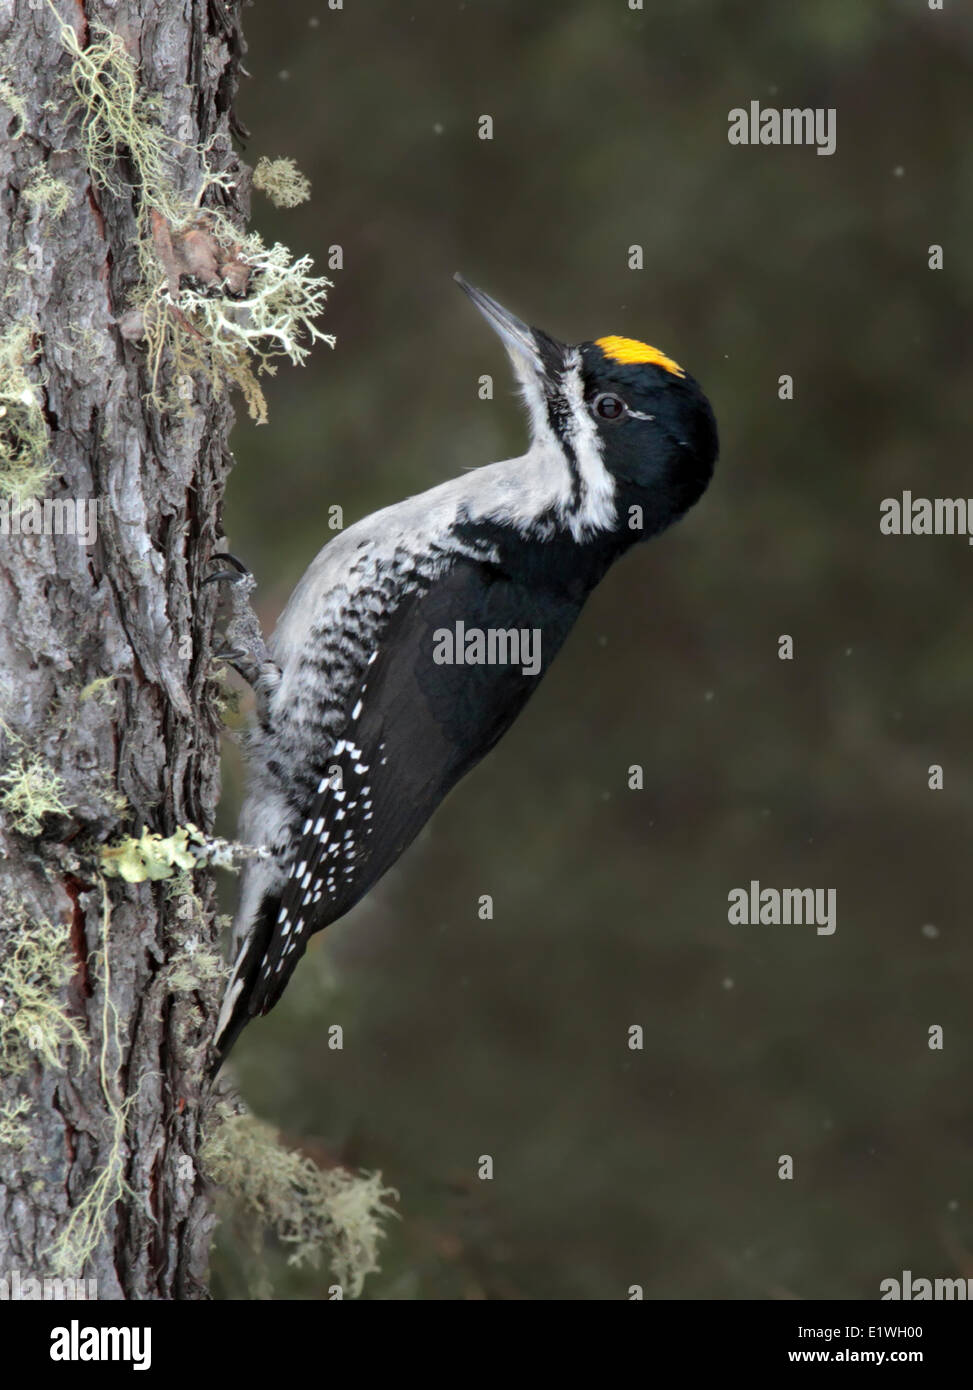 Black-backed Woodpecker, Picoides arcticus, perched on spruce tree at Candle Lake, Saskatchewan Stock Photo